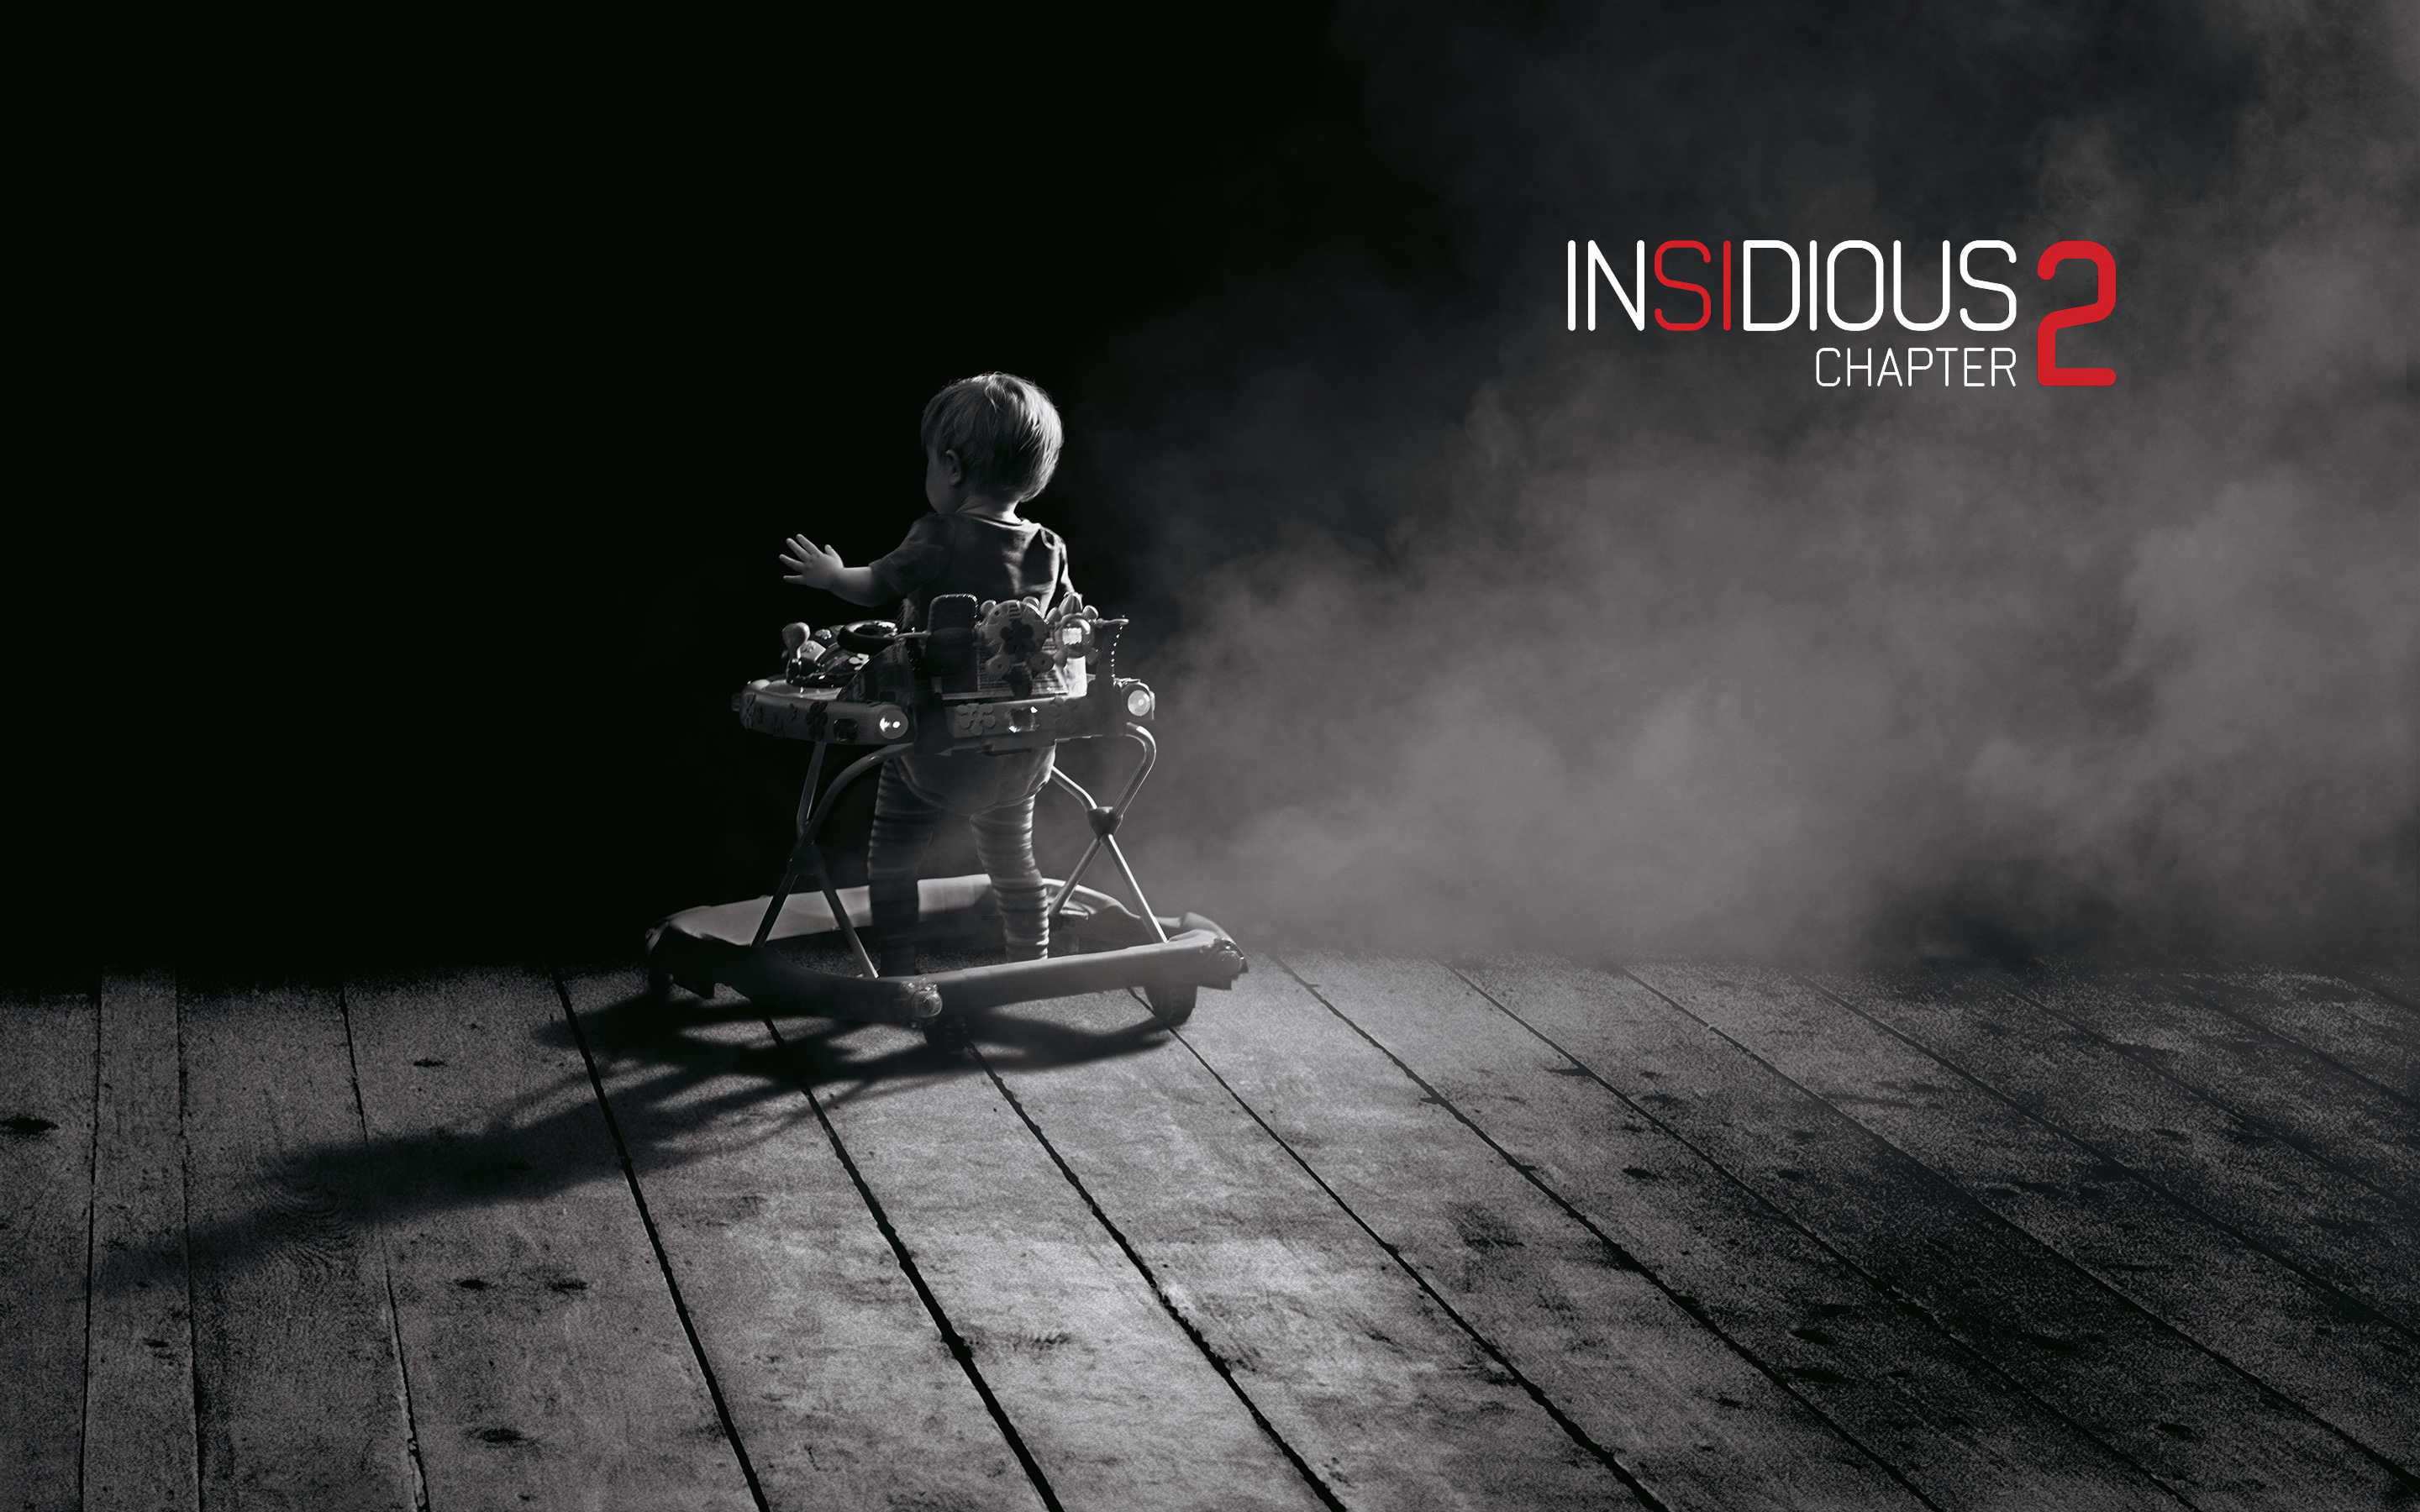 insidious 3 full movie with english subtitles free download